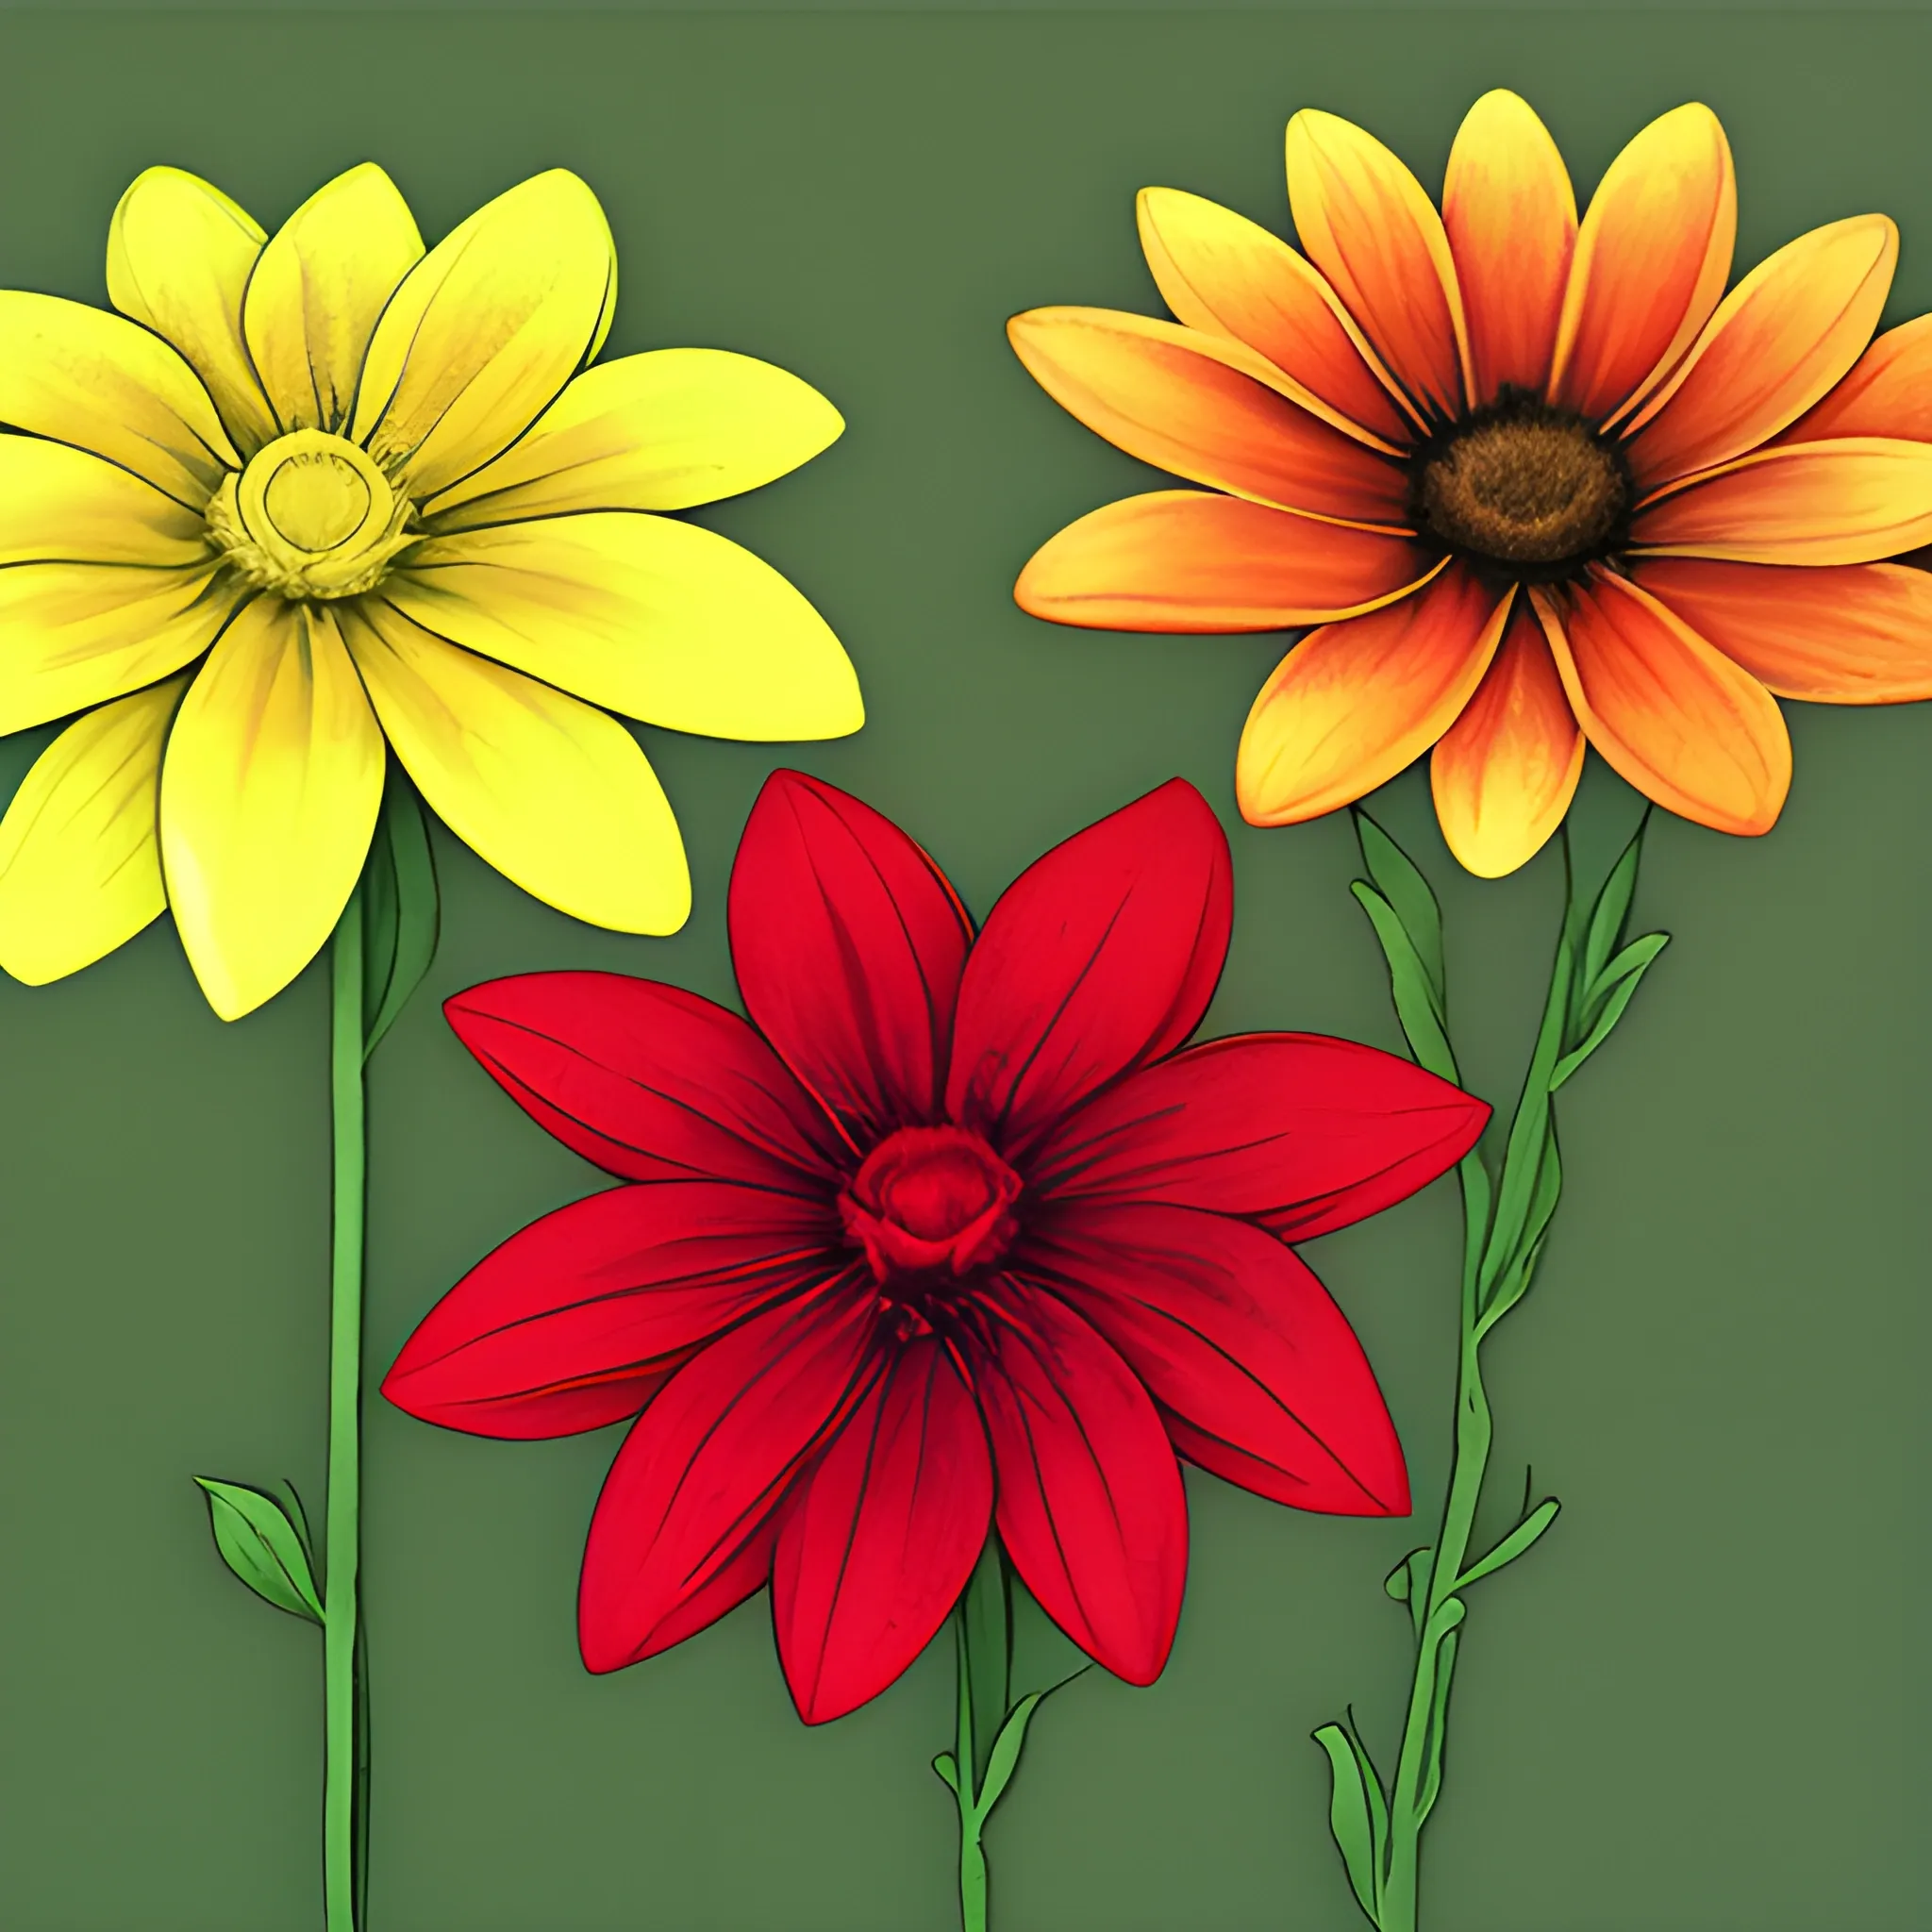 3 flowers, one red, one yellow and one dark green
